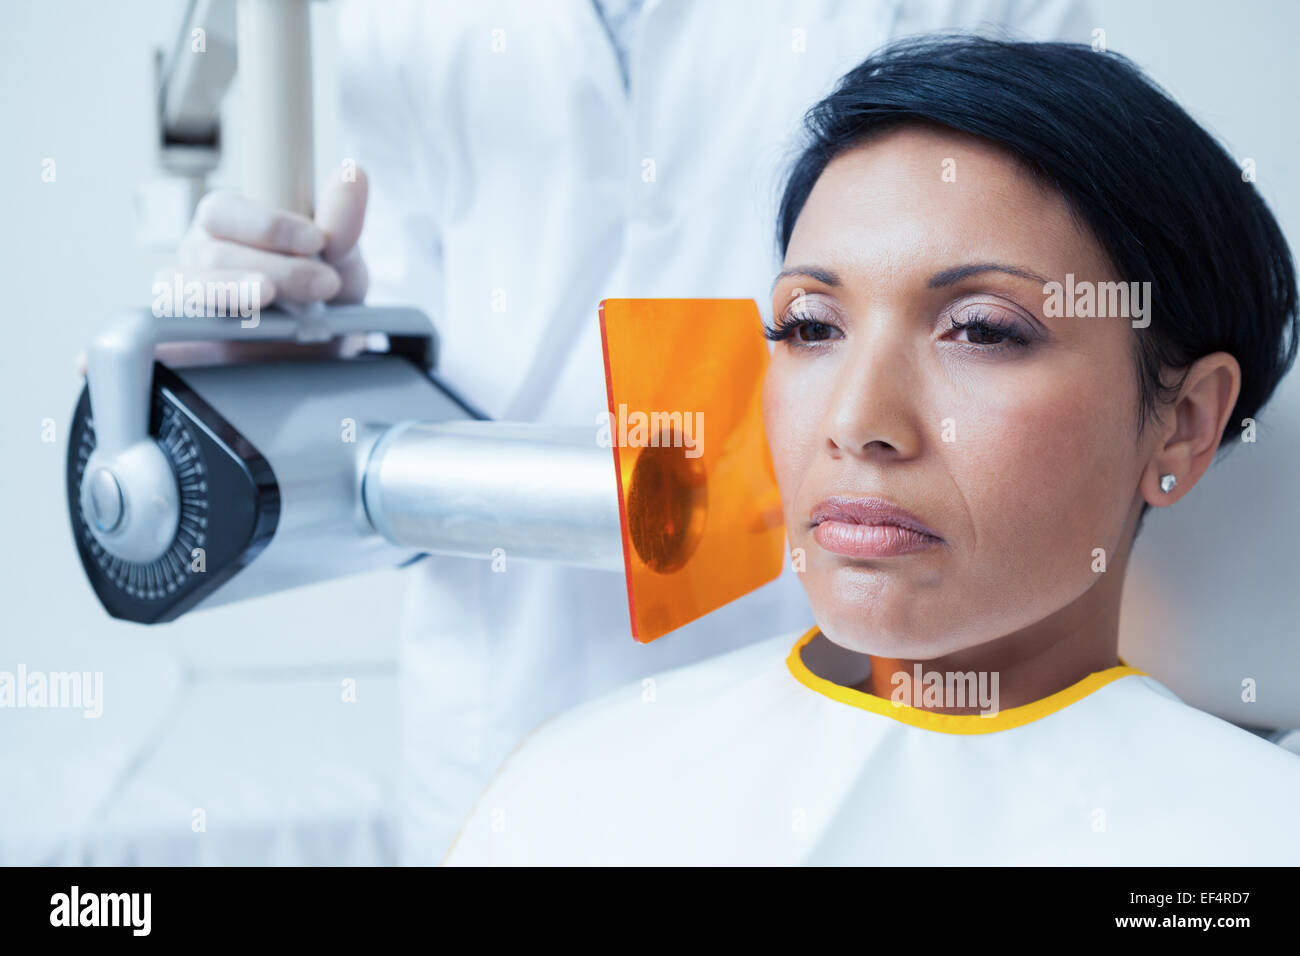 Serious young woman undergoing dental checkup Stock Photo